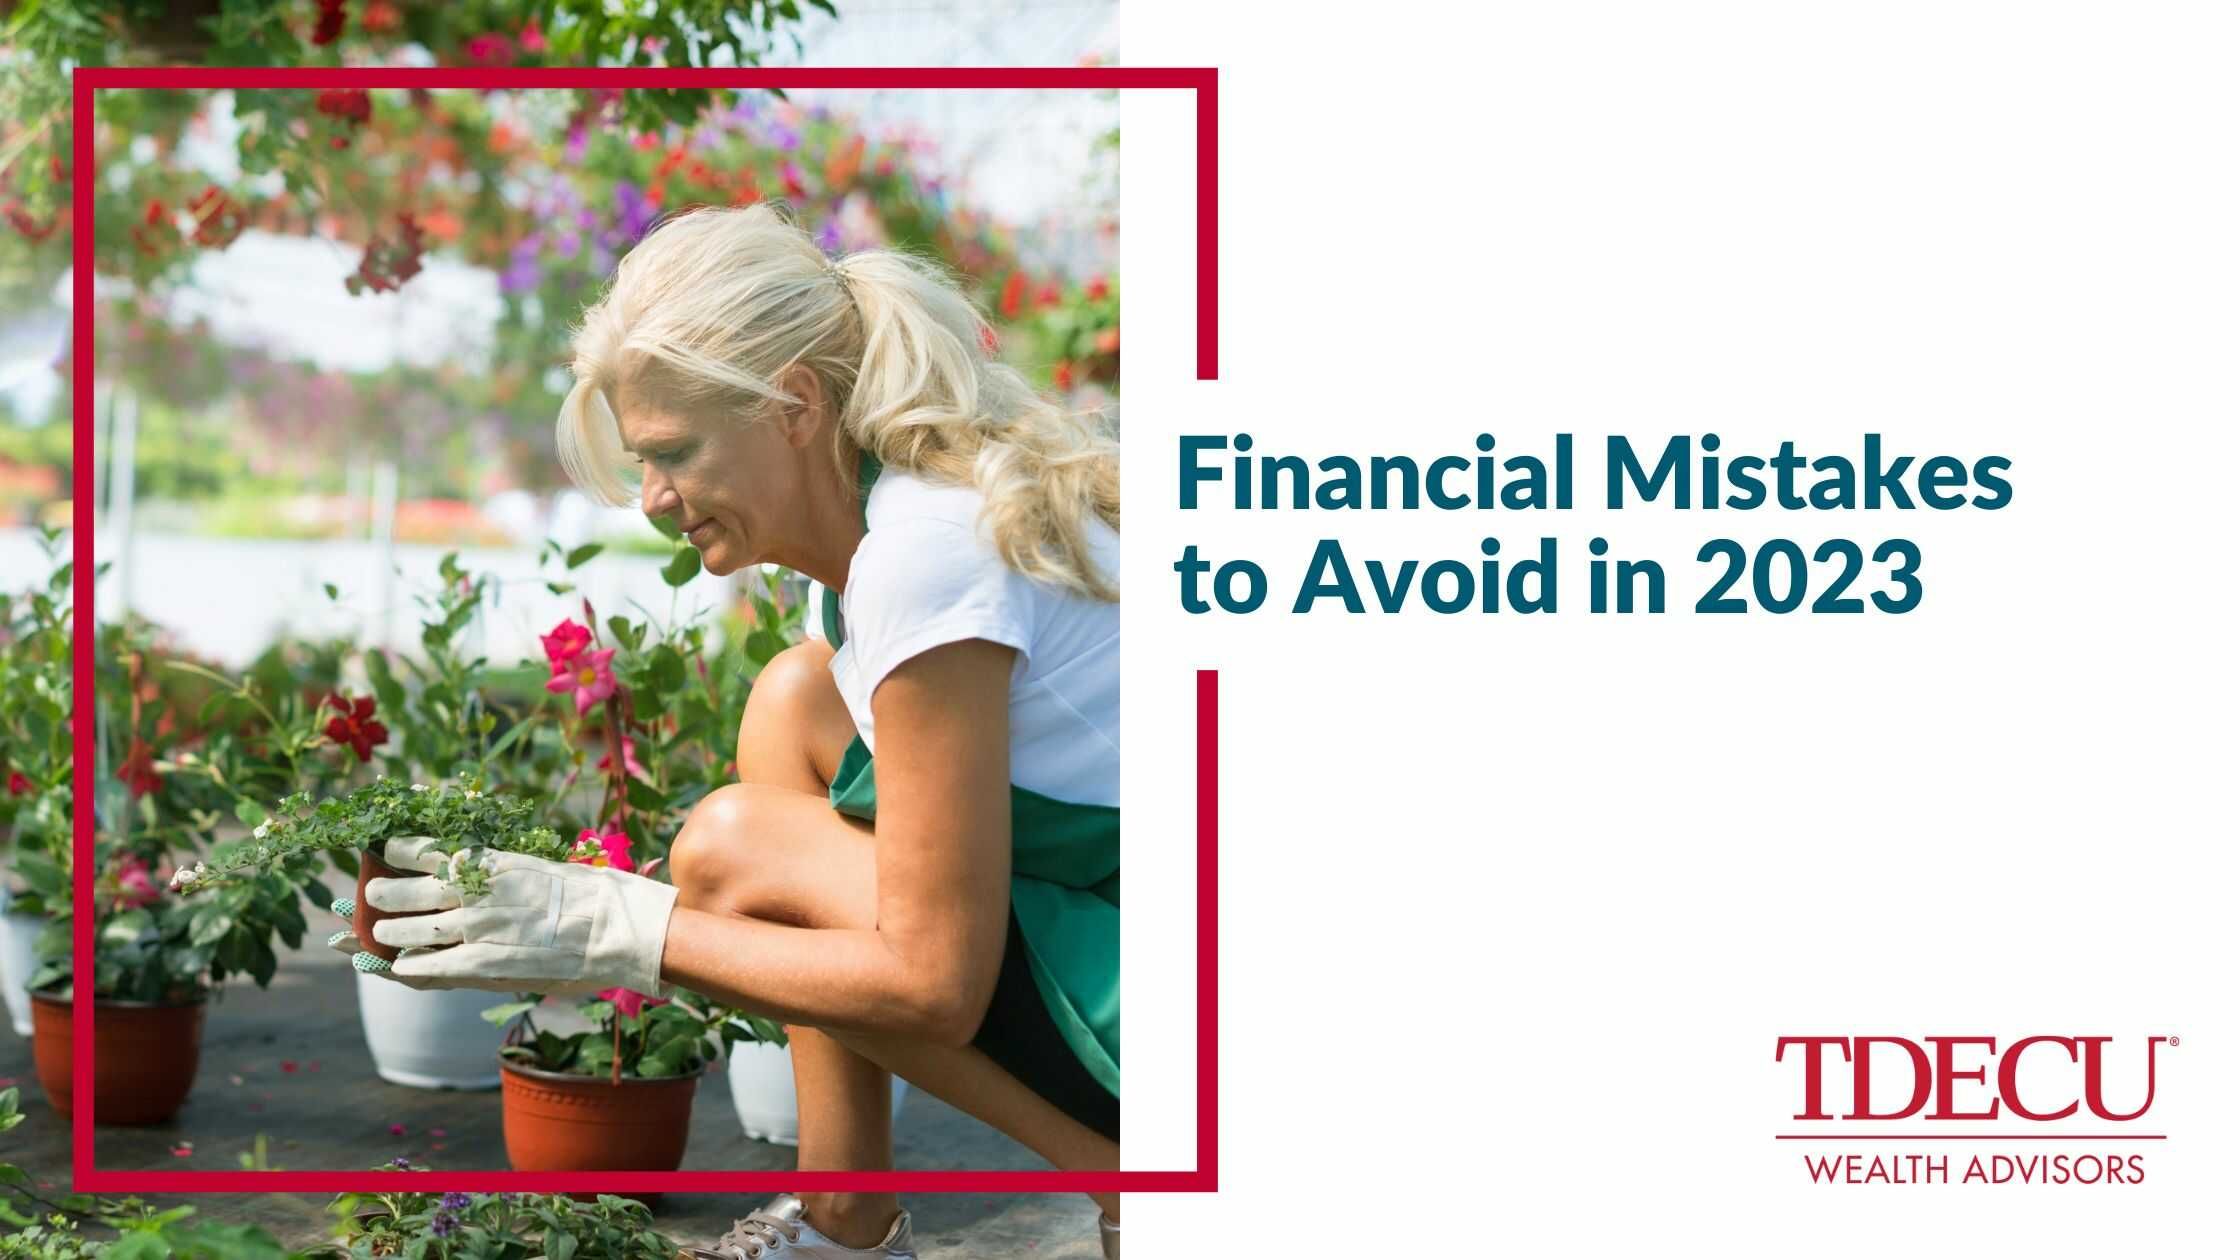 Financial Mistakes to Avoid in 2023